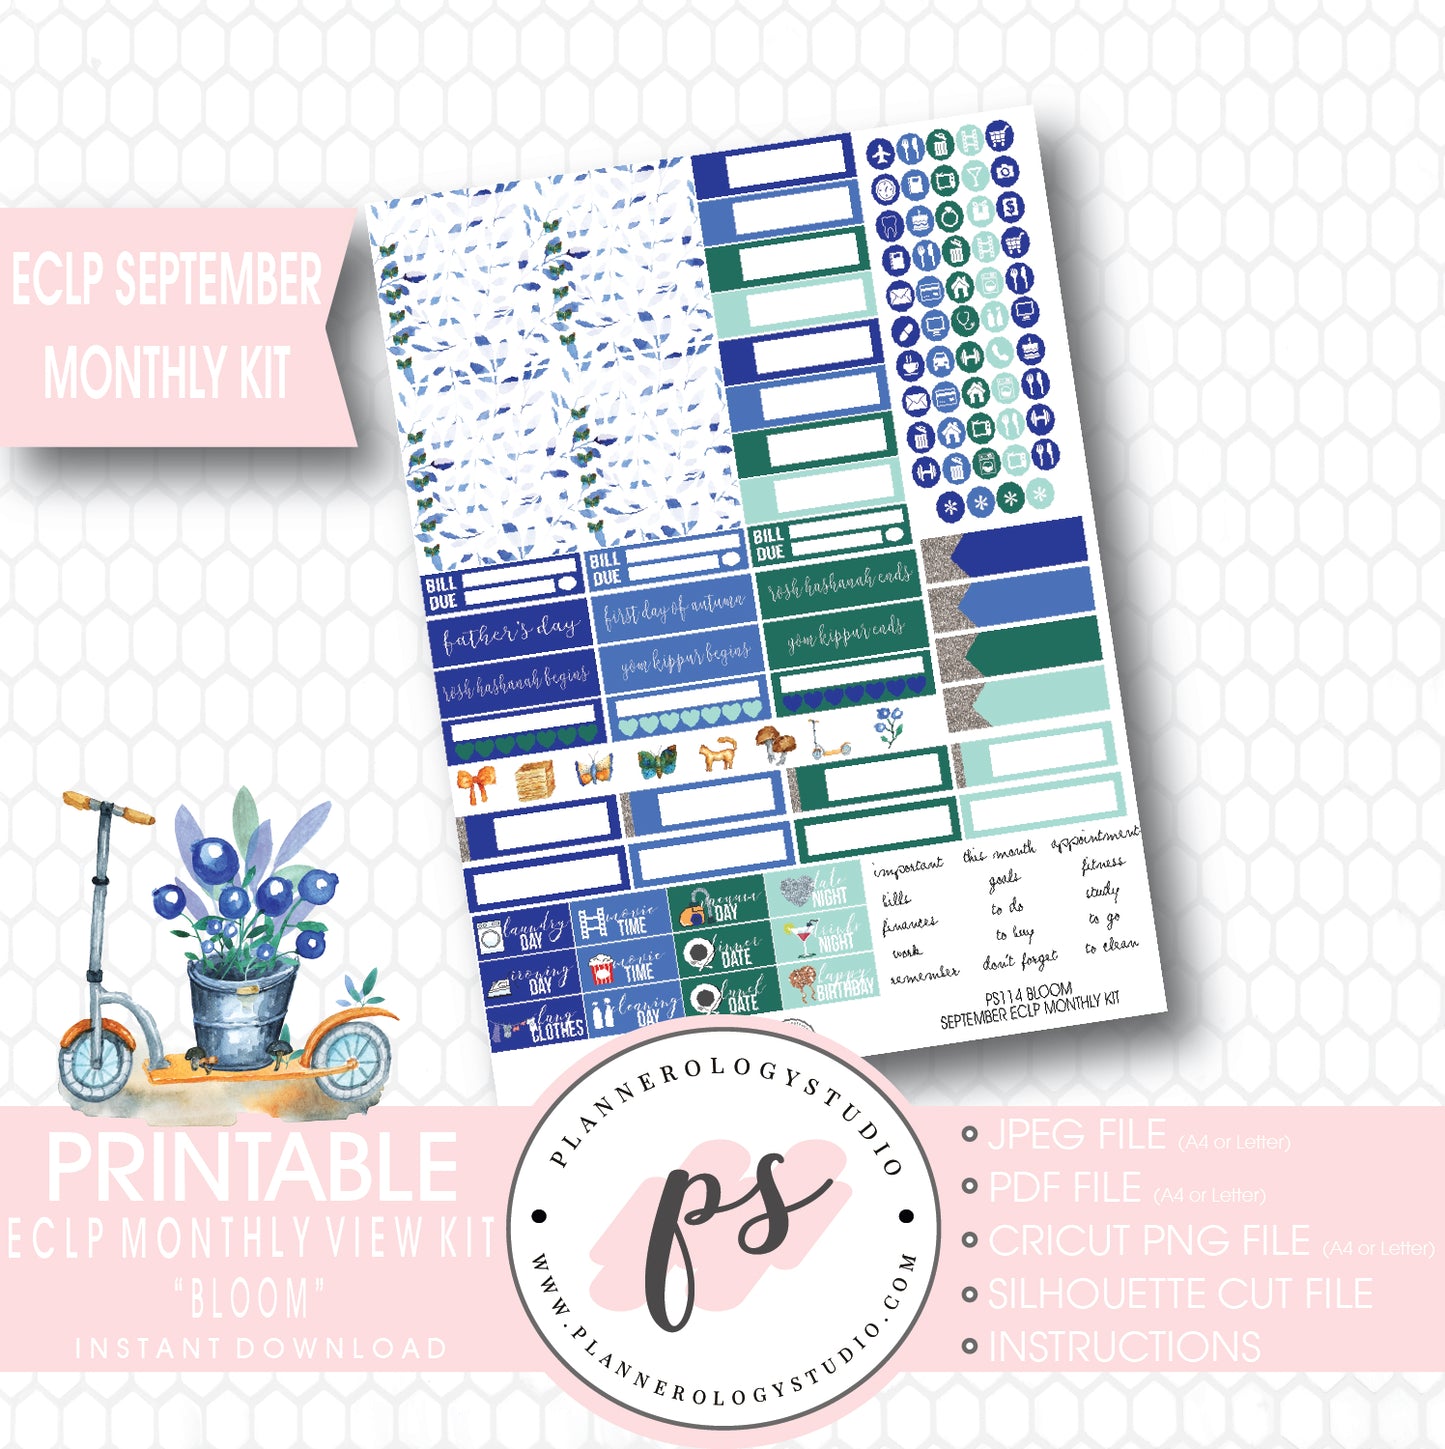 "Bloom" September 2017 Monthly View Kit Printable Planner Stickers (for use with ECLP) - Plannerologystudio